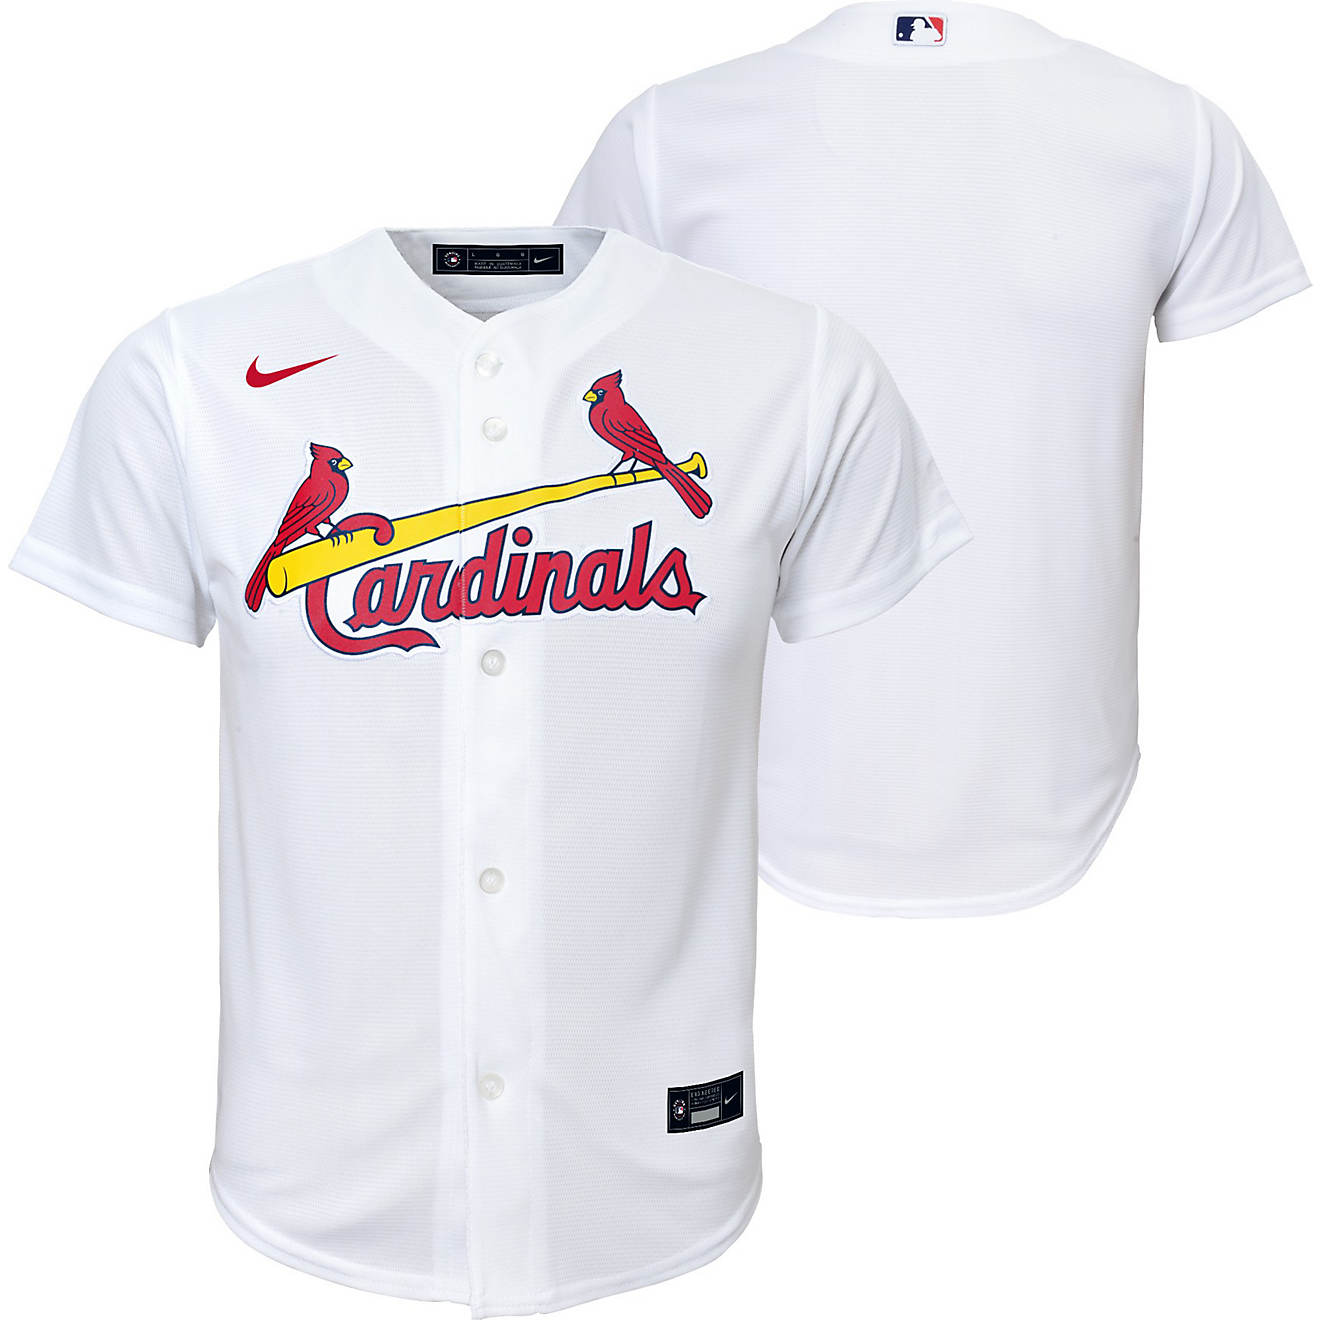 Nike Youth Arizona Cardinals Home Replica Jersey                                                                                 - view number 1